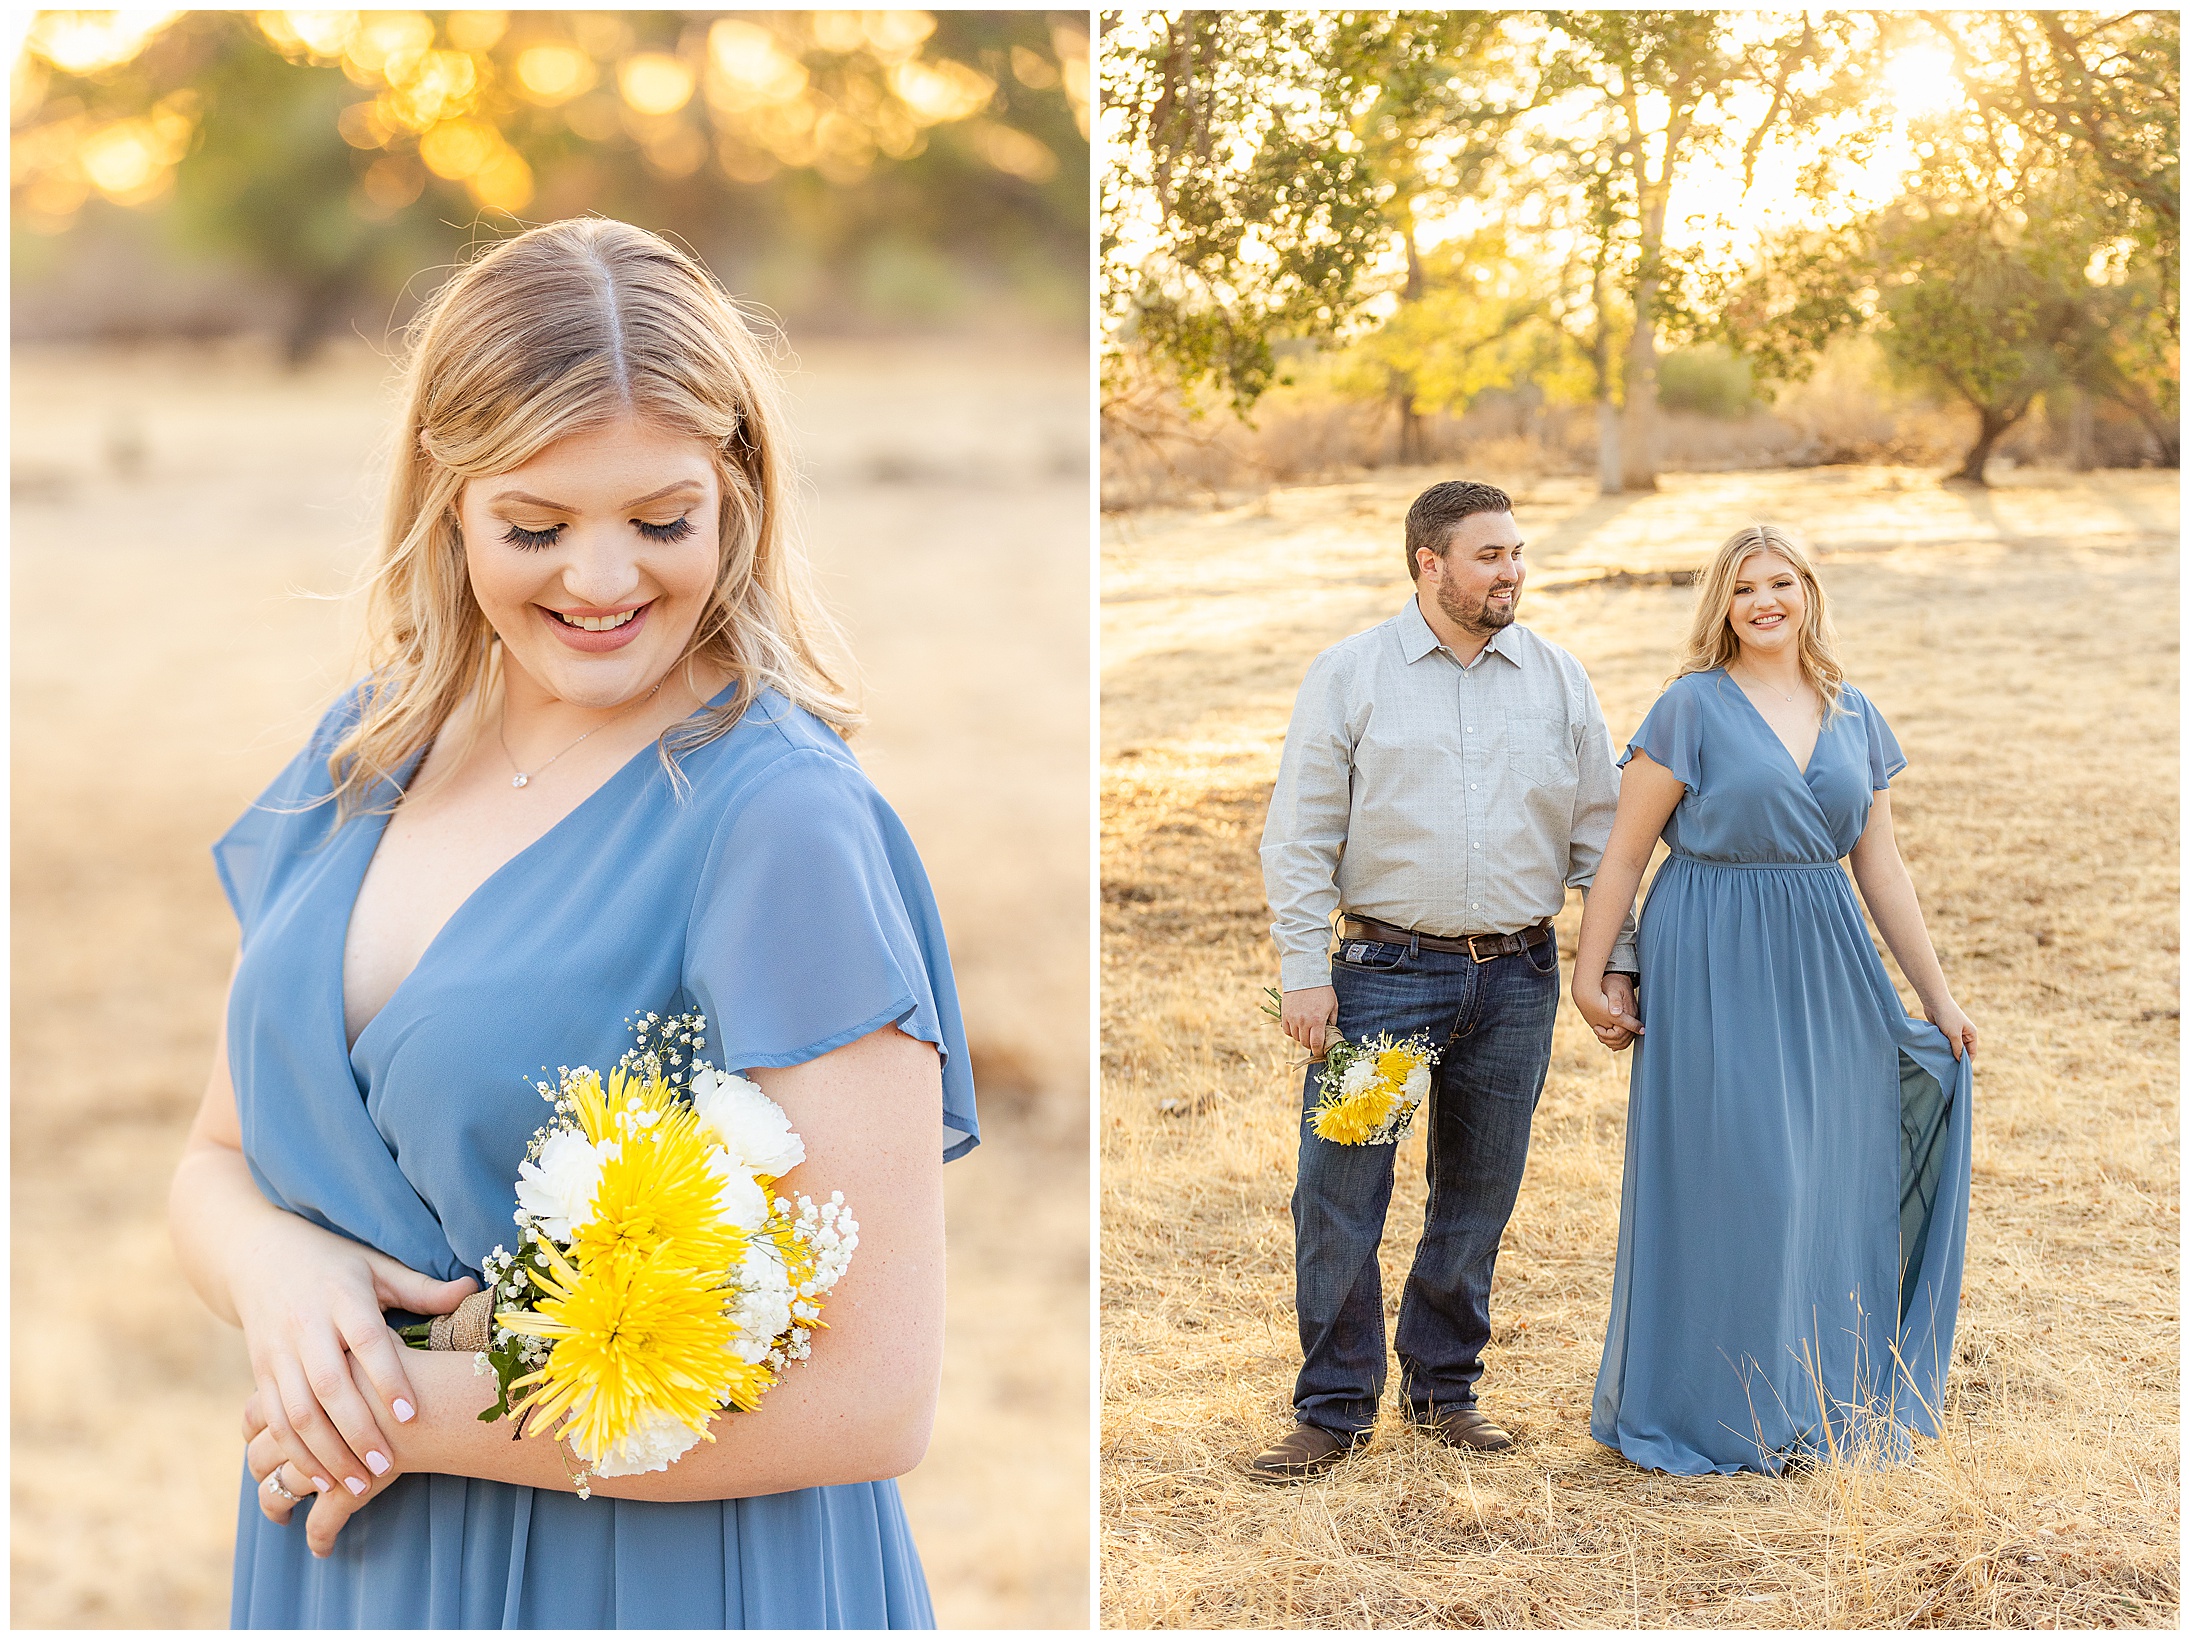 Upper Bidwell Park Engagement Session Chico CA Trail Fall September Yellow Flowers_0021.jpg